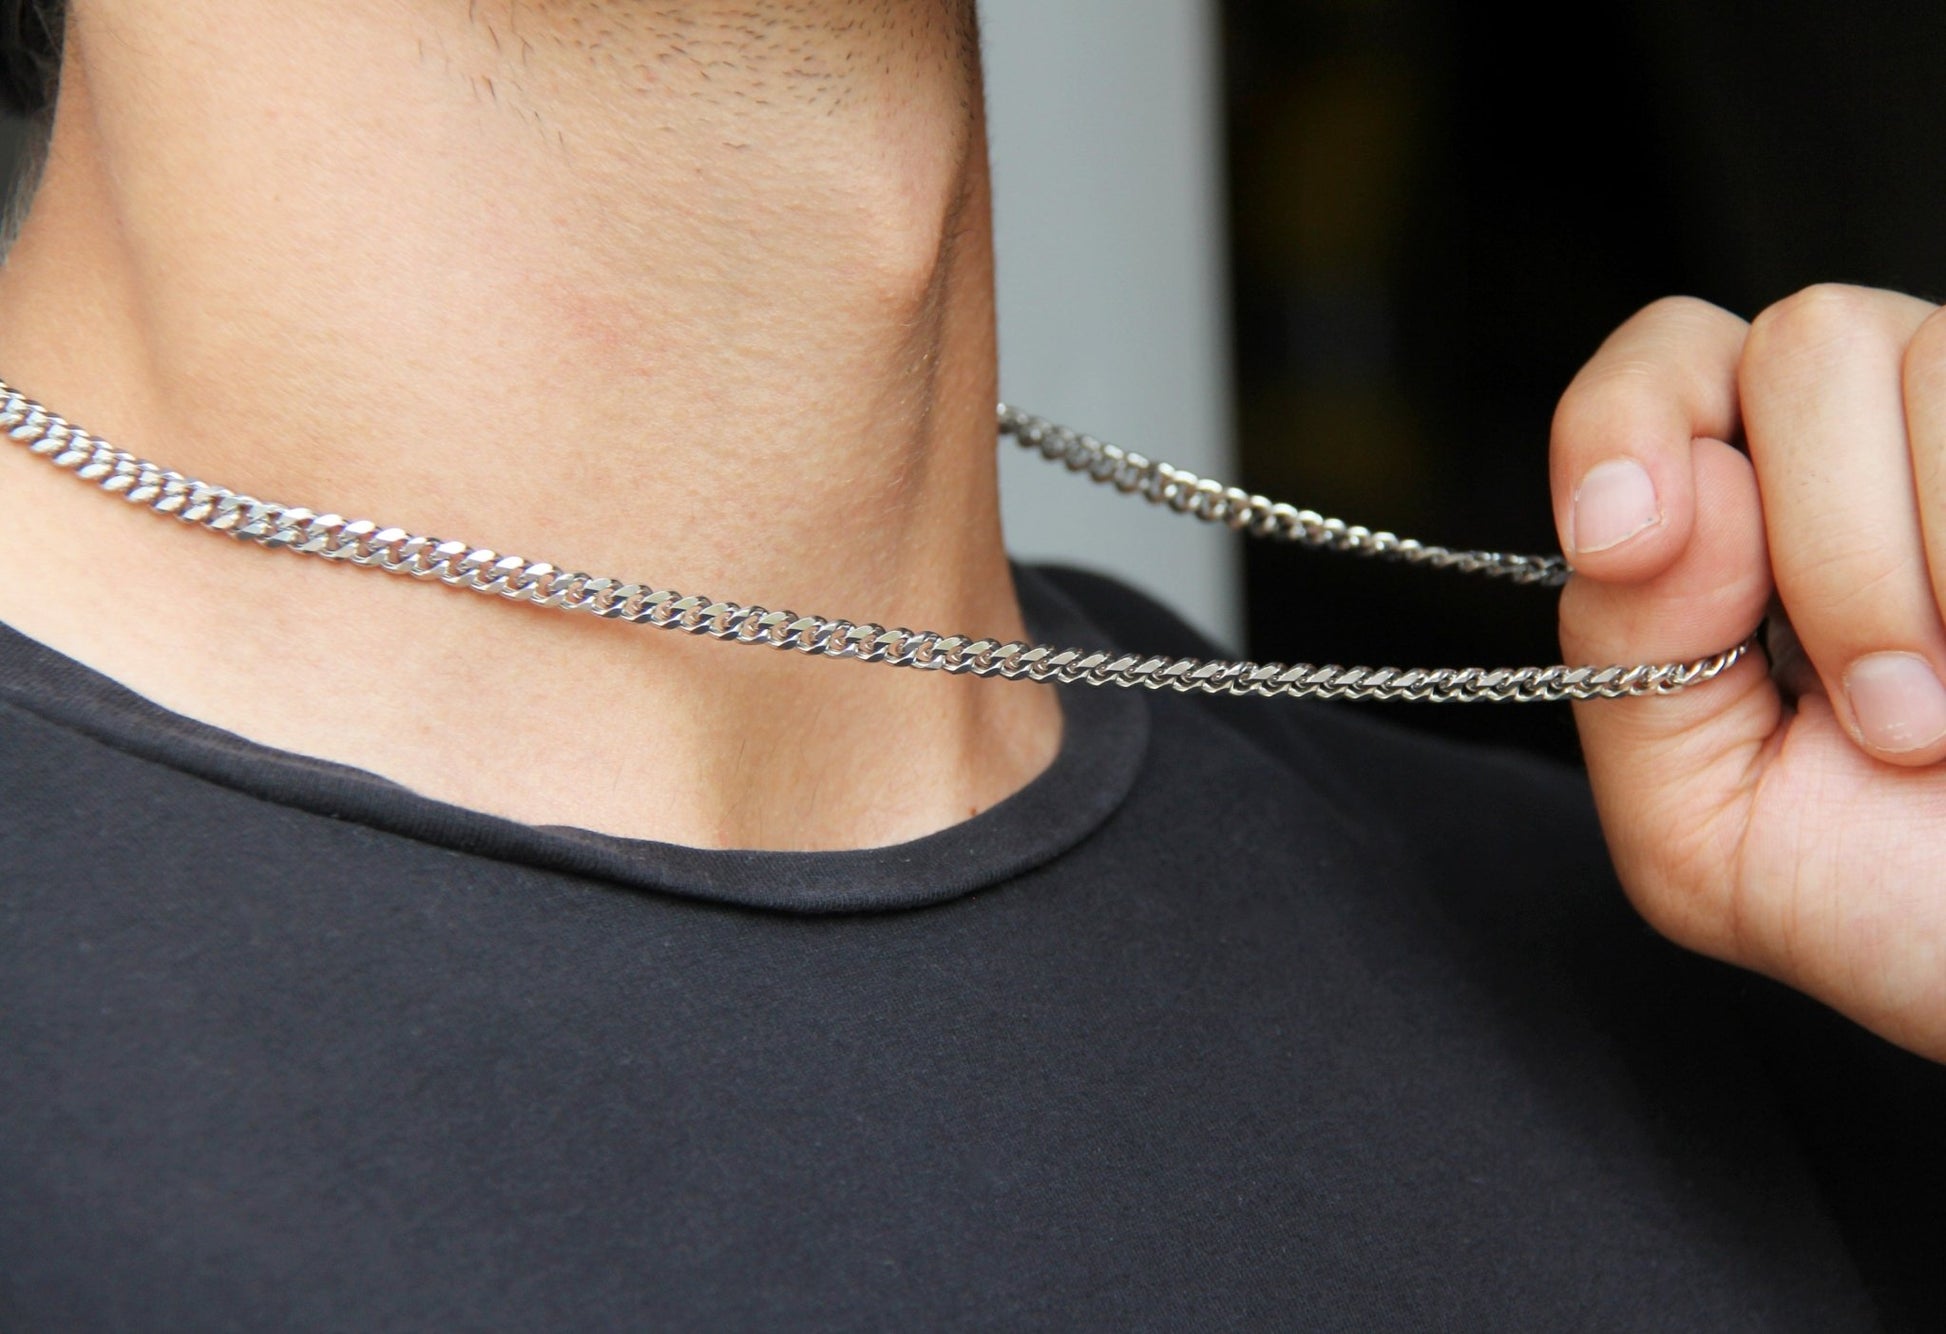 Men's Chunky Curb Chain Necklace